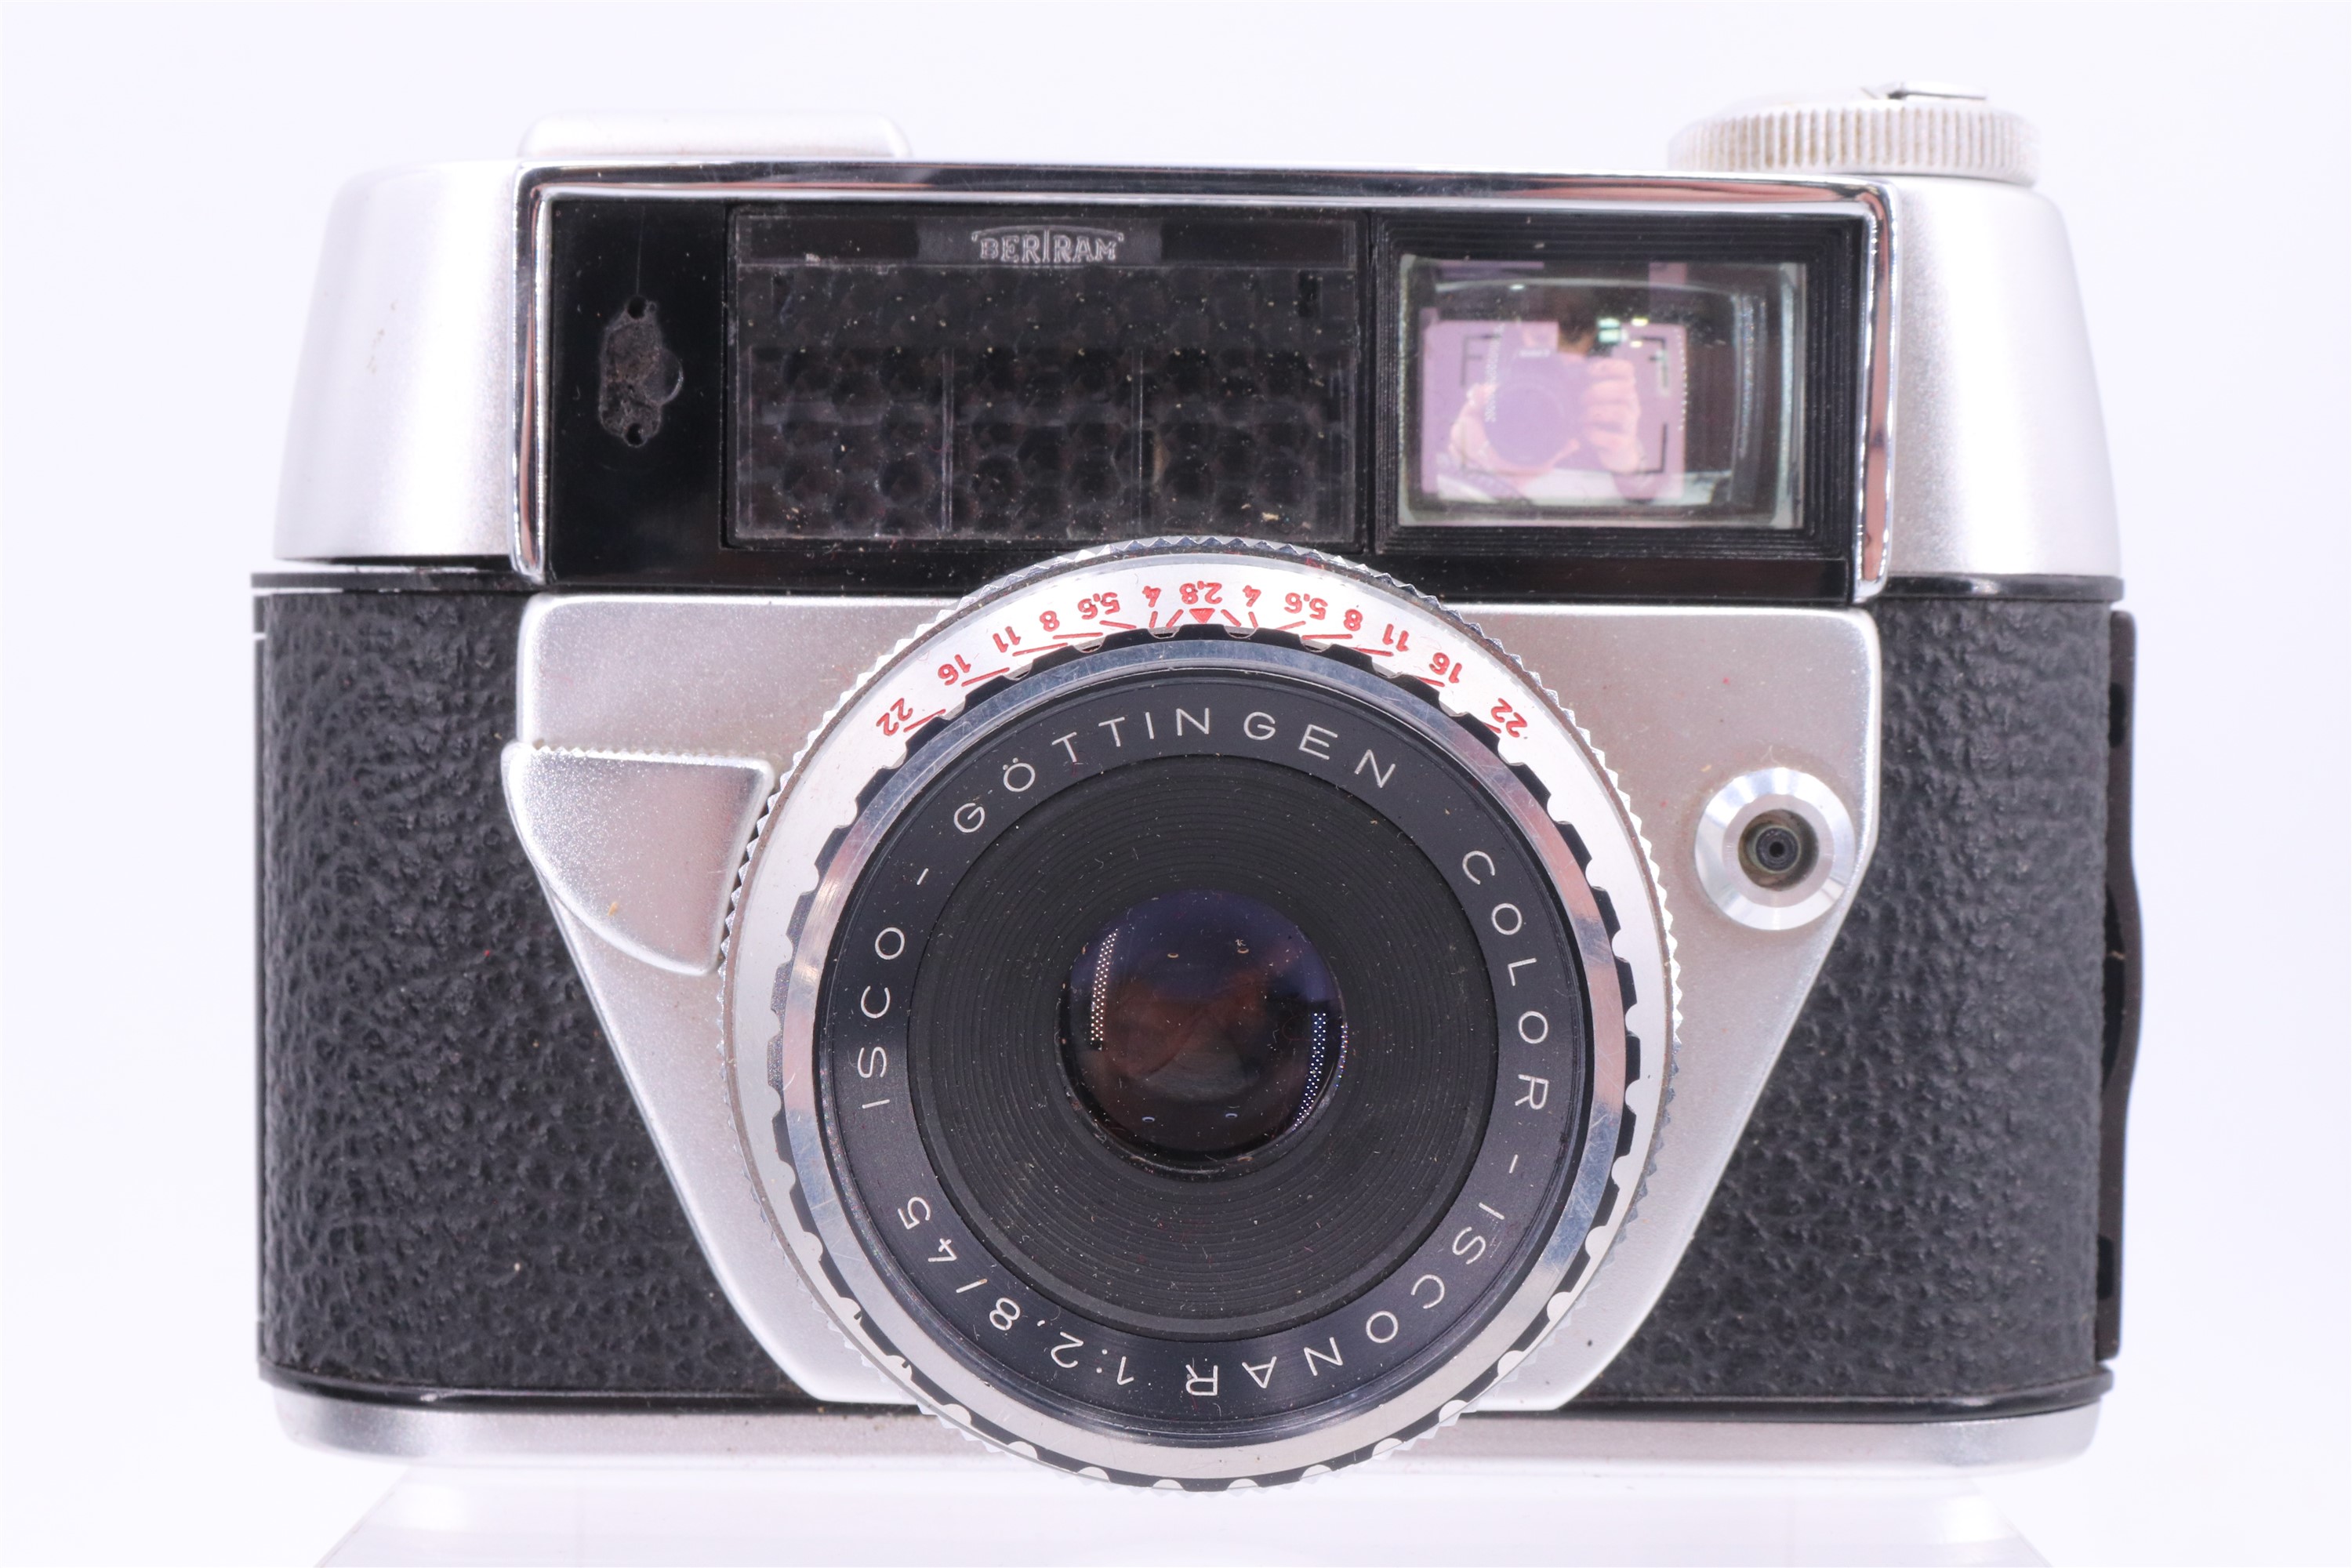 An Olympia "Regula Auto - Set II" camera together with a Polaroid "Colorpack 82" land camera - Image 3 of 4